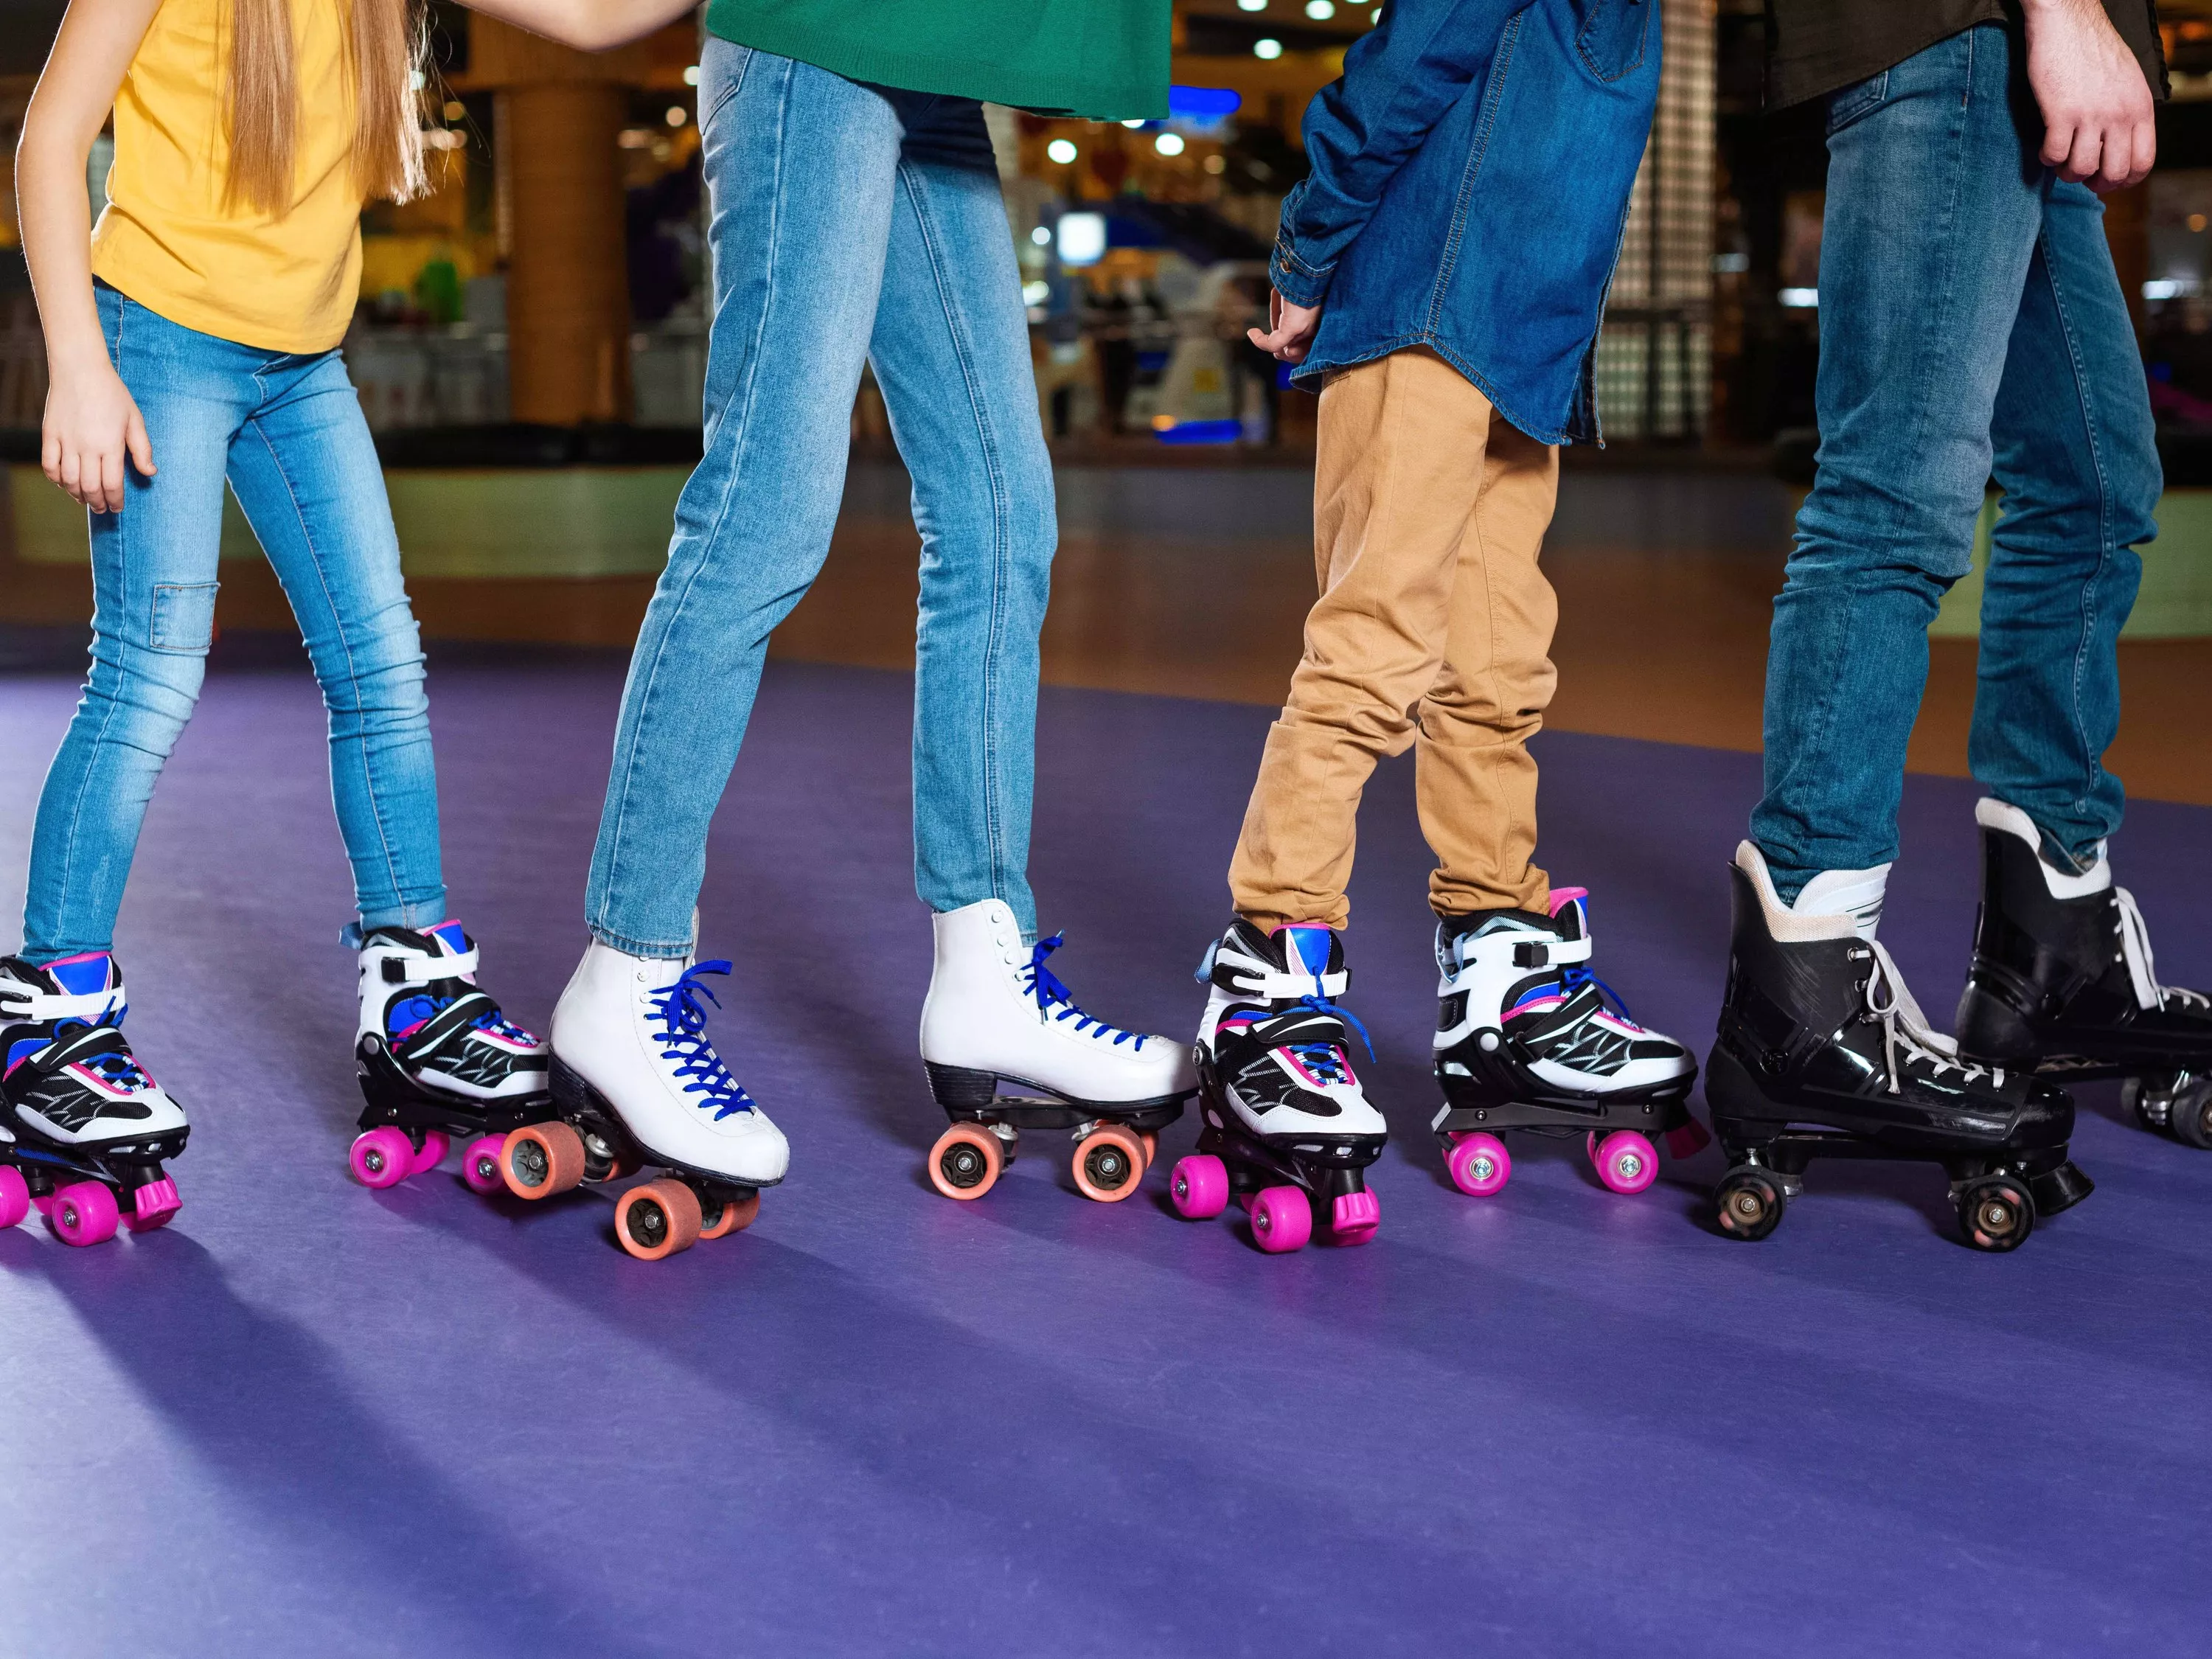 Pier 2 Roller Rink in USA, North America | Roller Skating & Inline Skating - Rated 4.2